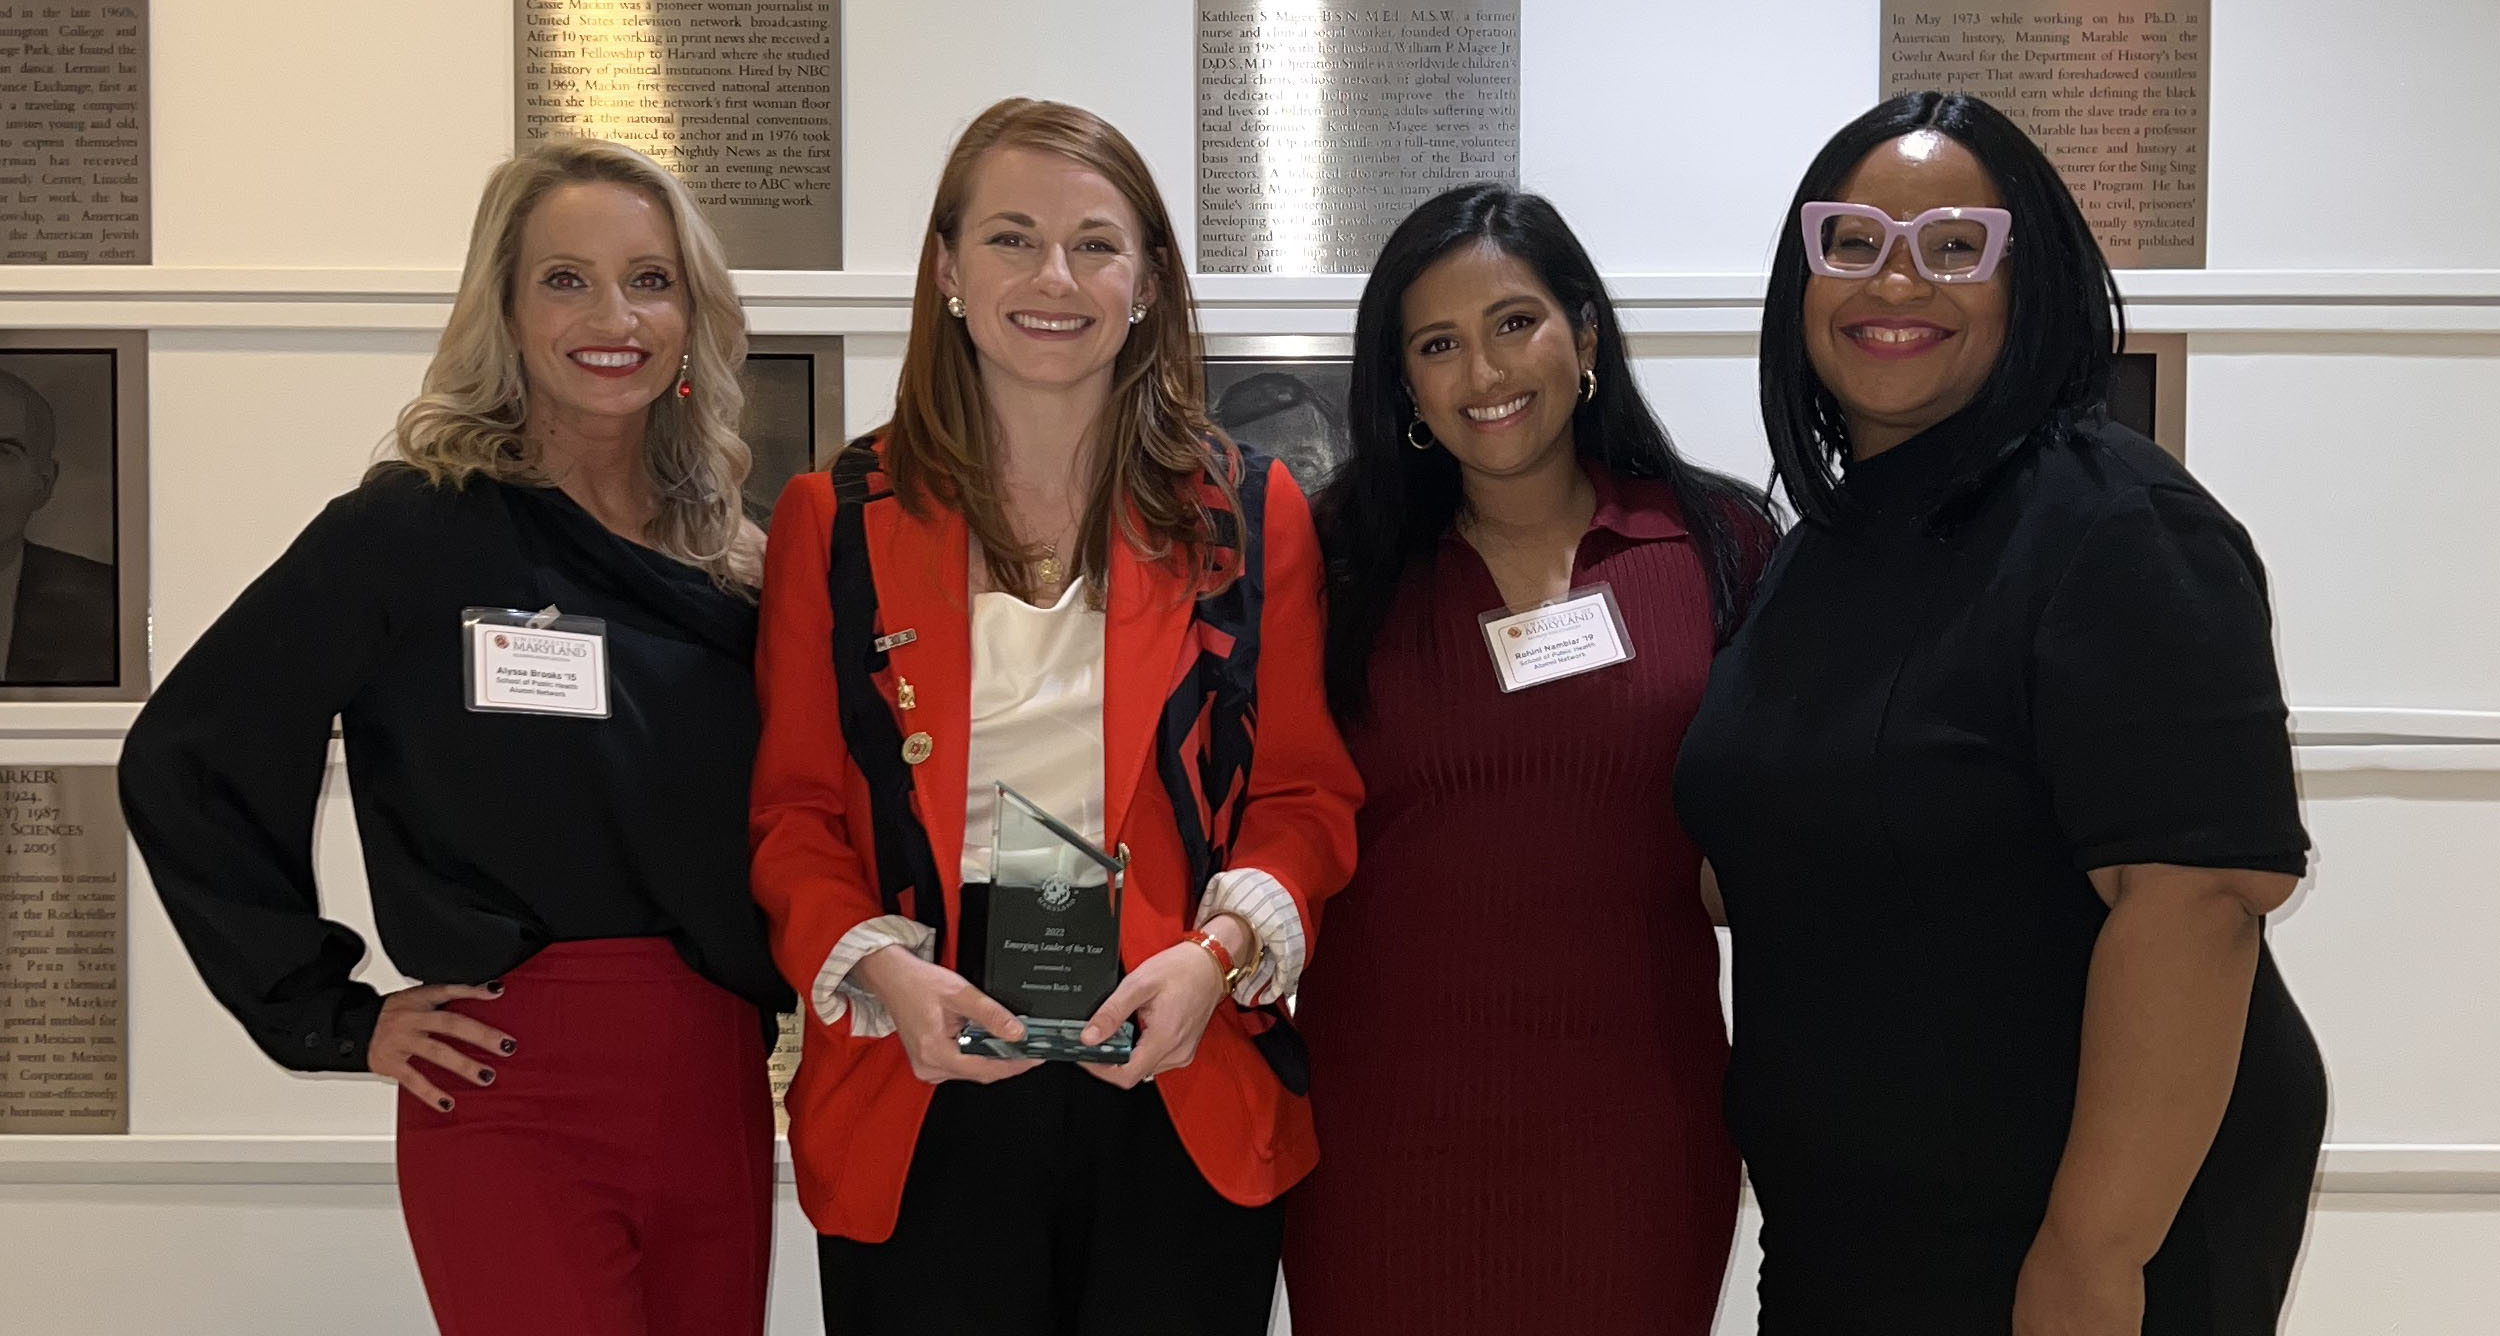 Four women stand next to each smiling, celebrating Jameson Roth, second from left, who is holding a plaque for "Emerging Leader of the Year."